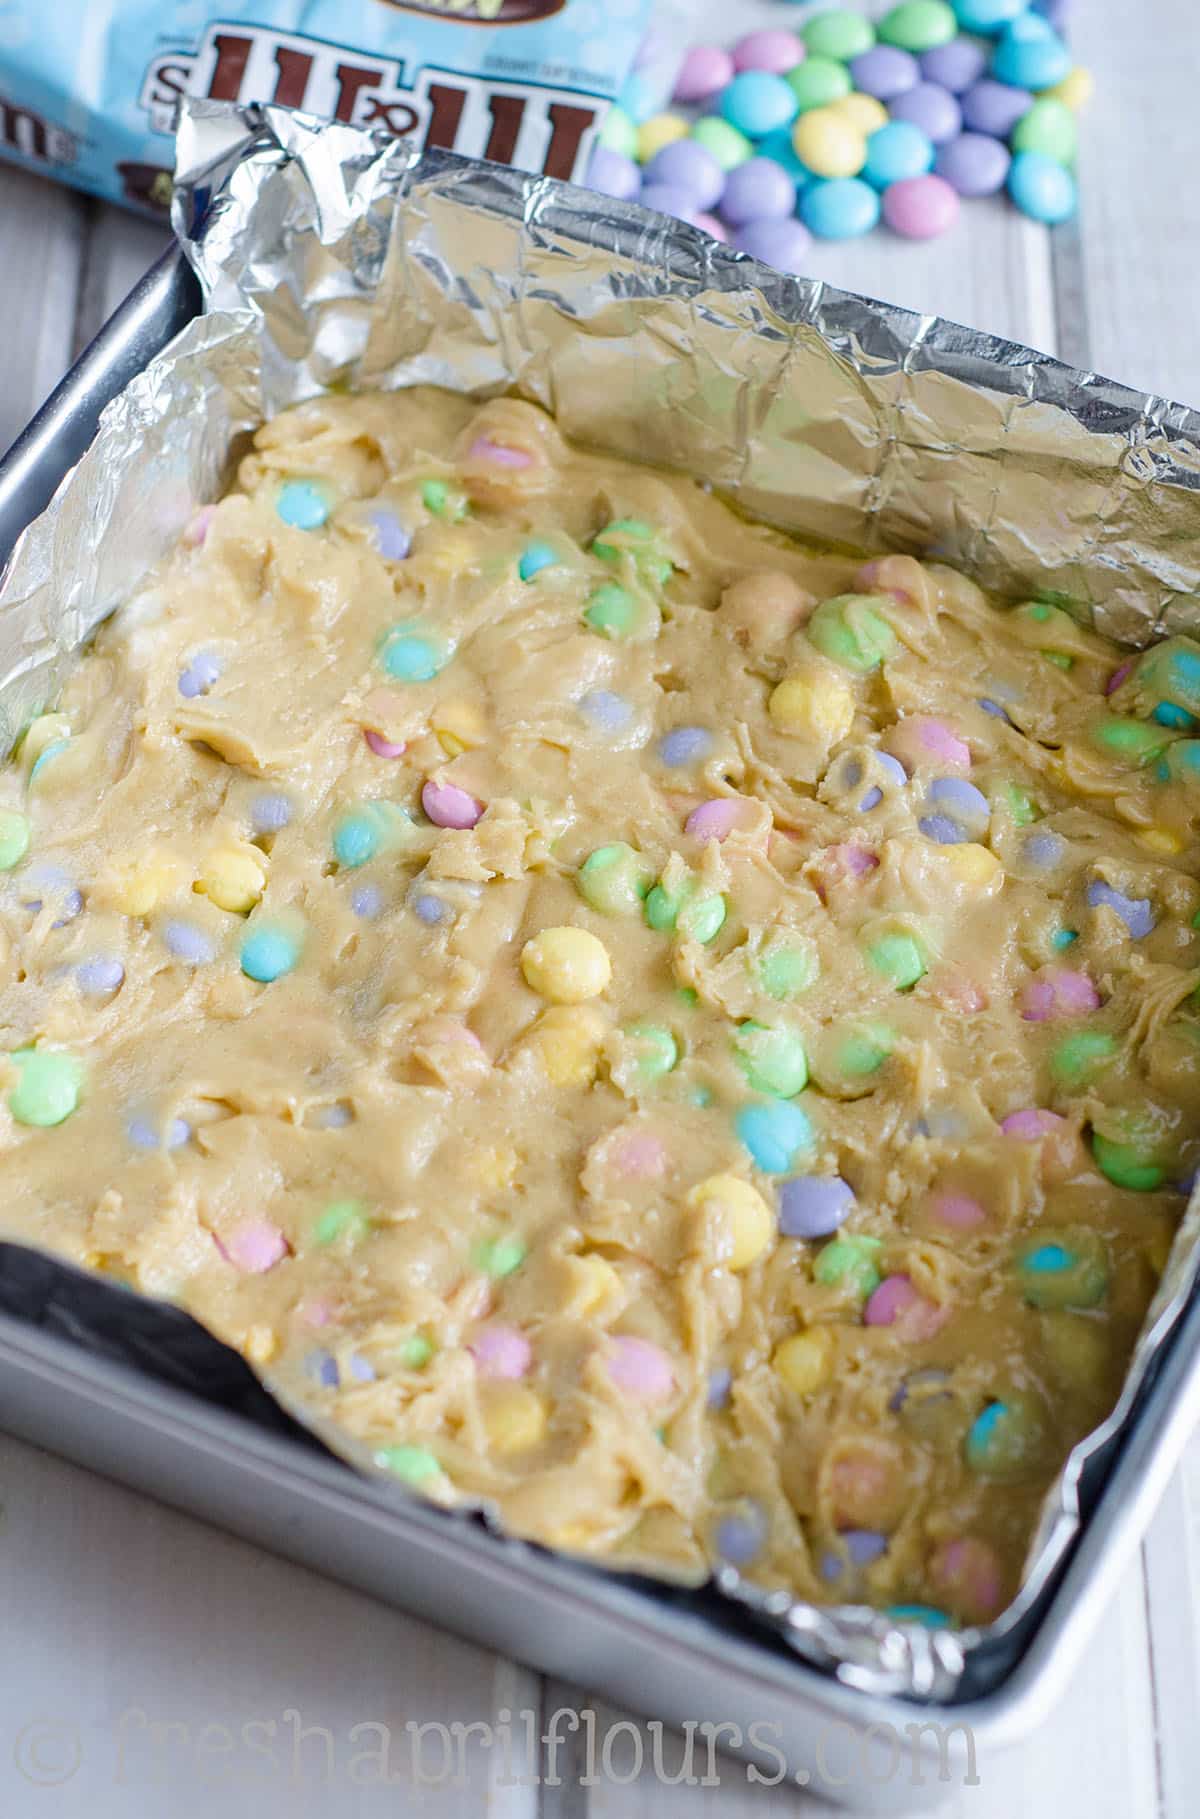 Peeps blondies batter pressed into a baking dish.